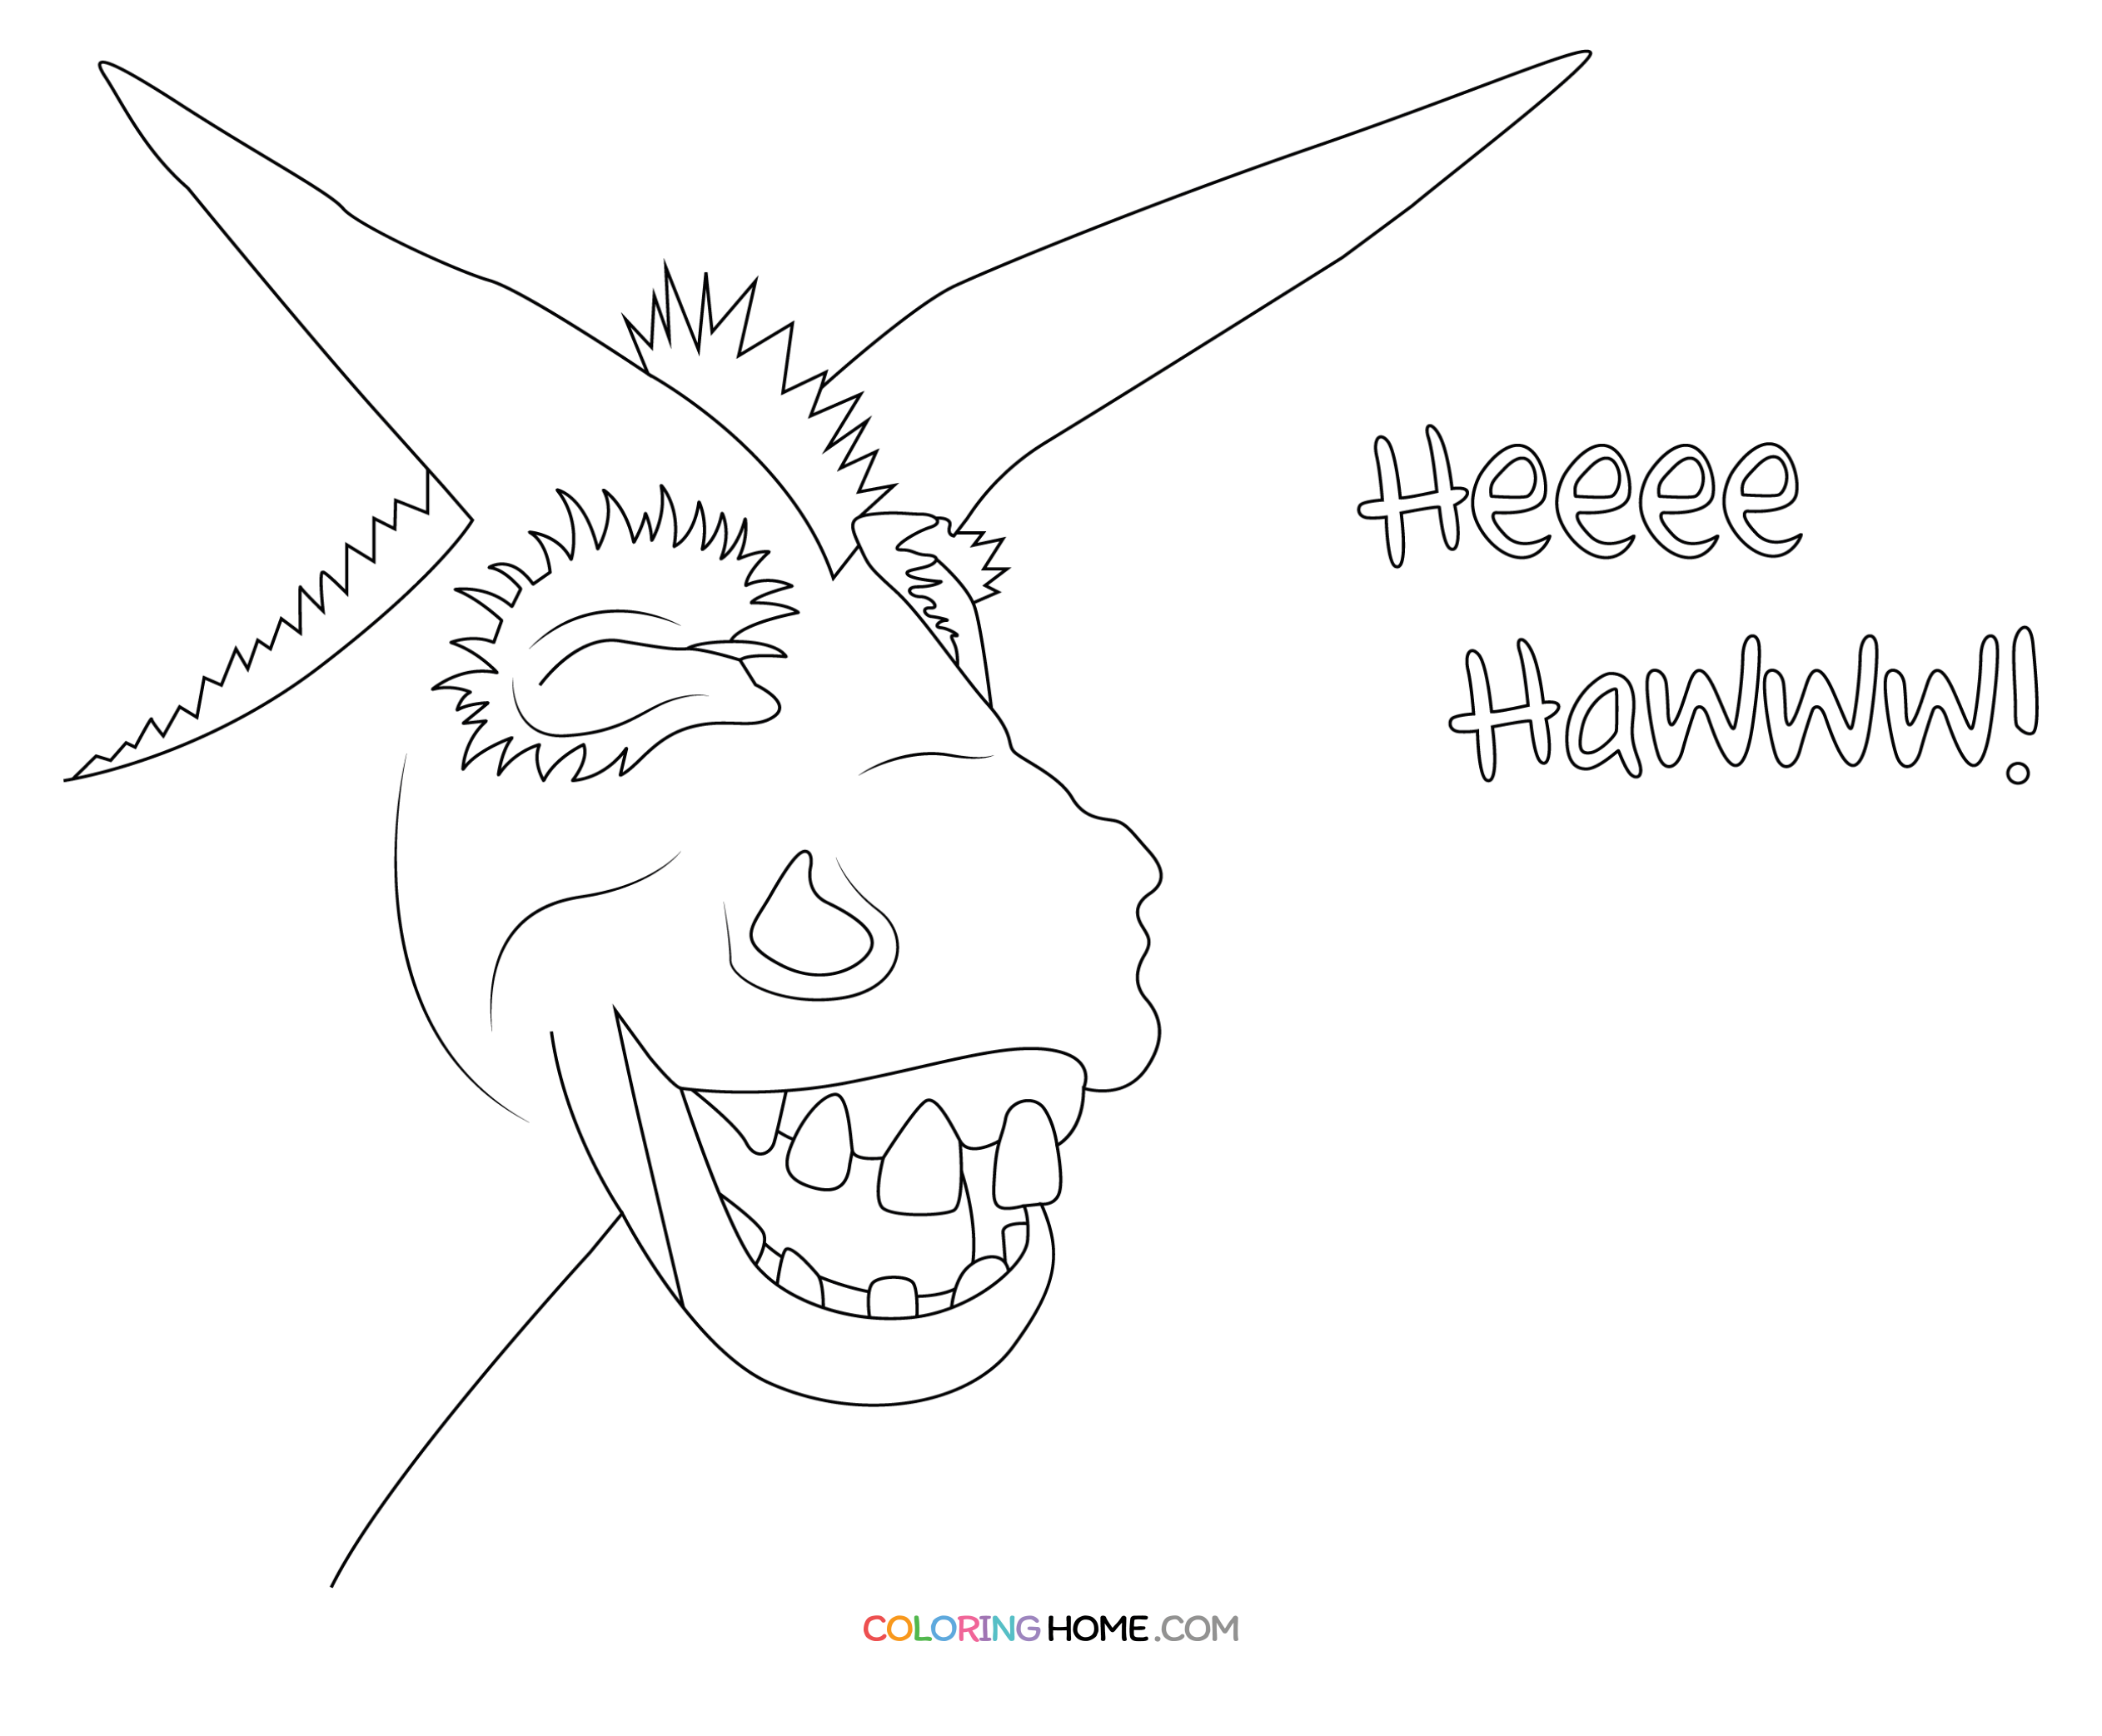 The Wonky Donkey book coloring page